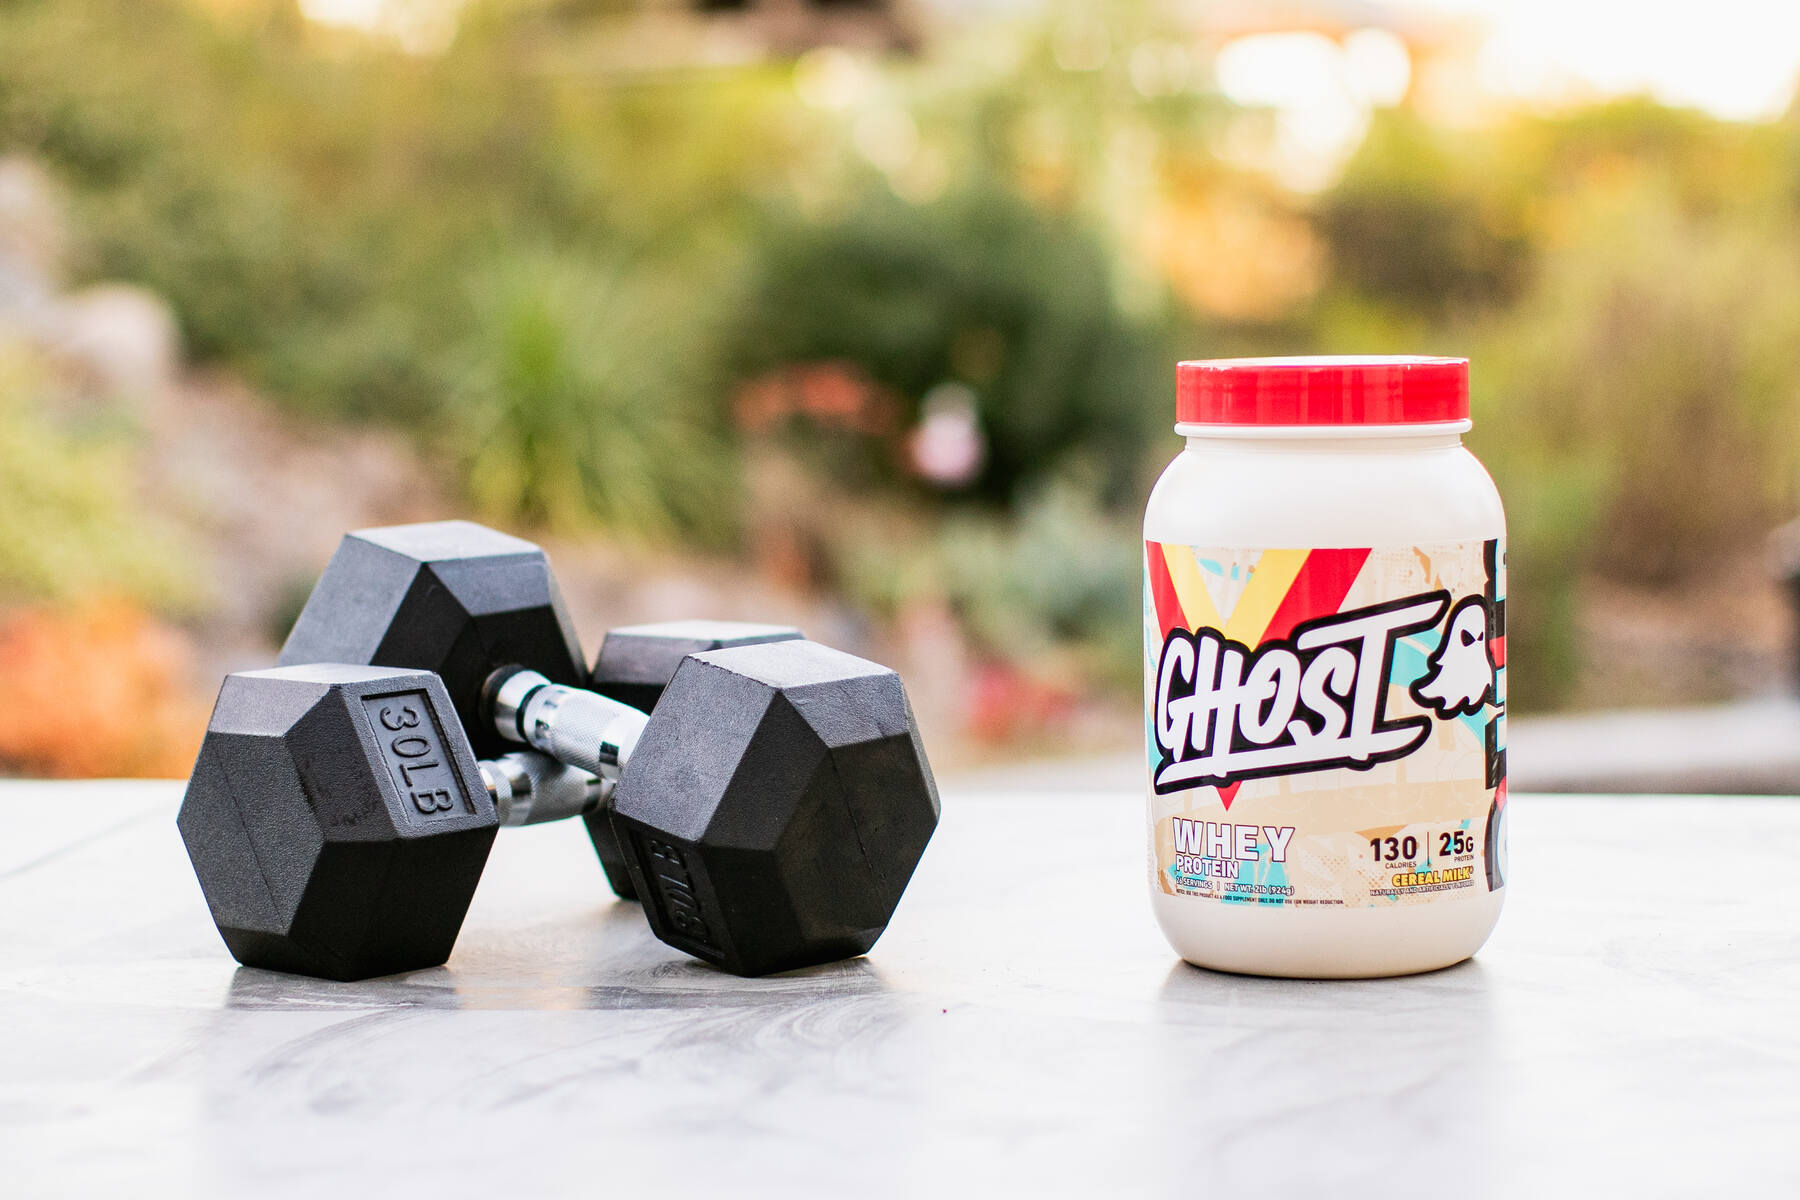 An outdoor setting with a container of Ghost Whey Protein in a vibrant, graffiti-style labeled bottle next to a pair of black hexagonal 30lb dumbbells, with greenery in the soft-focus background